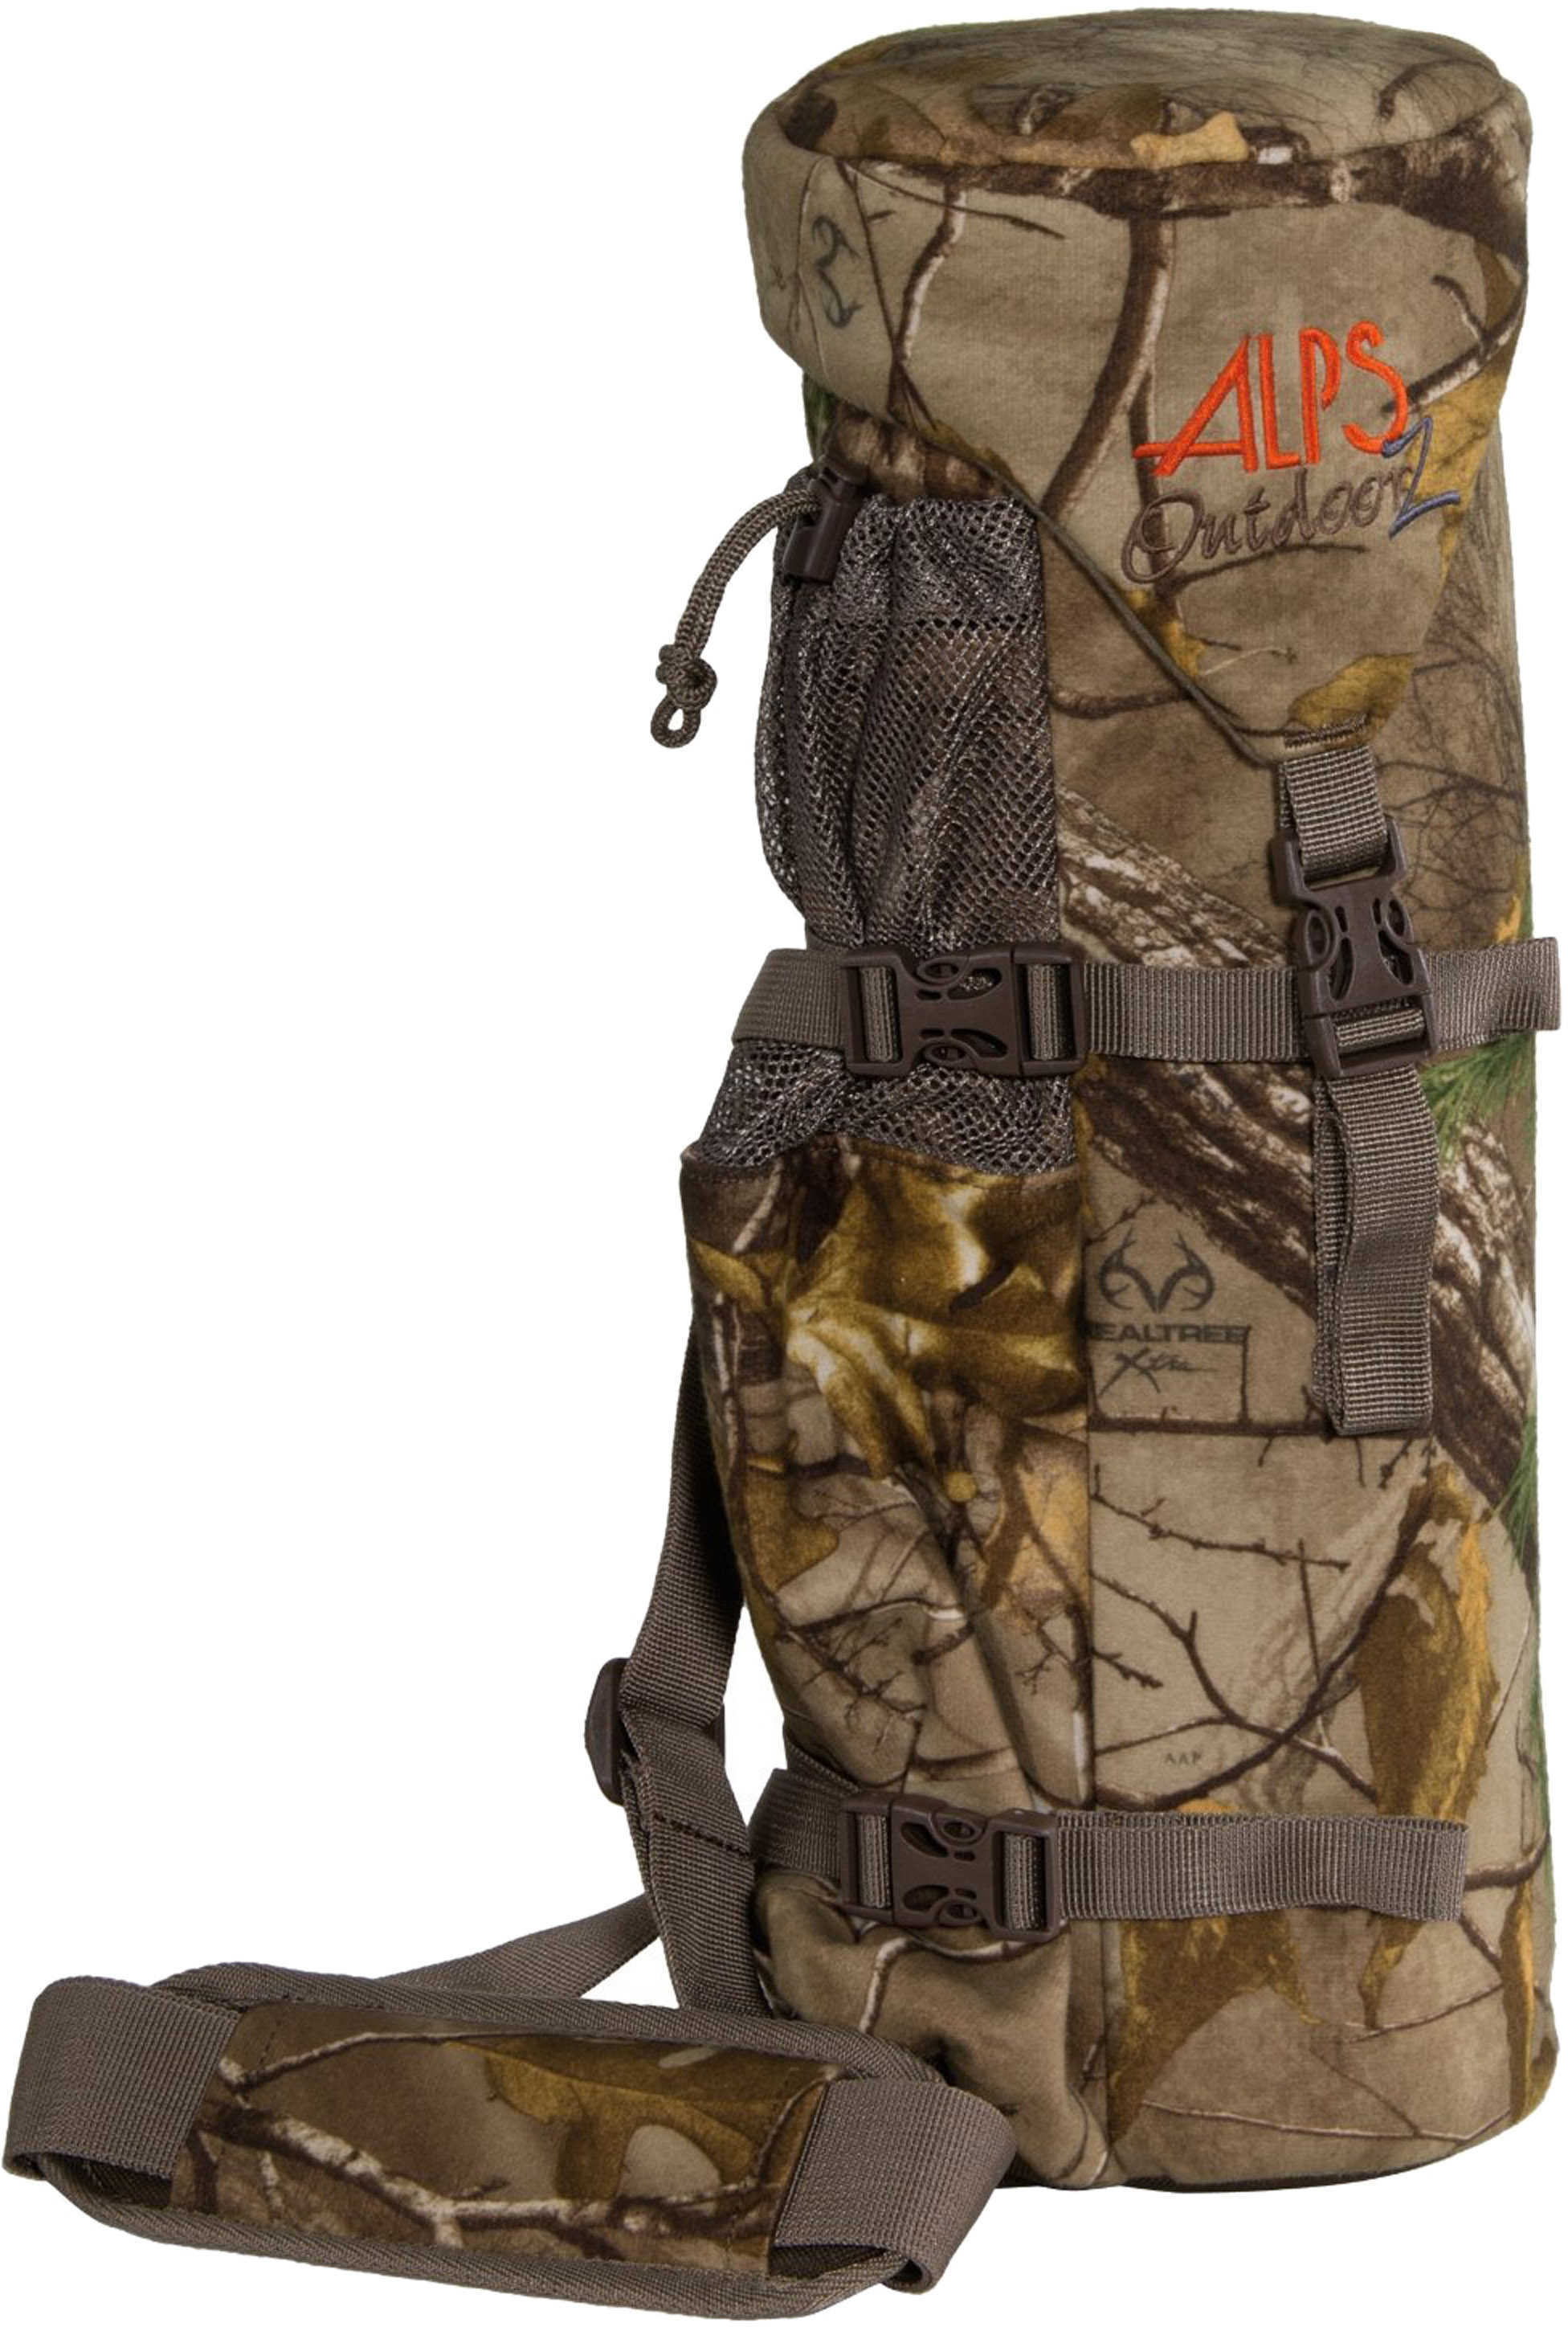 Alps Mountaineering OutdoorZ Stalker Pack, Realtree Xtra Md: 9411220